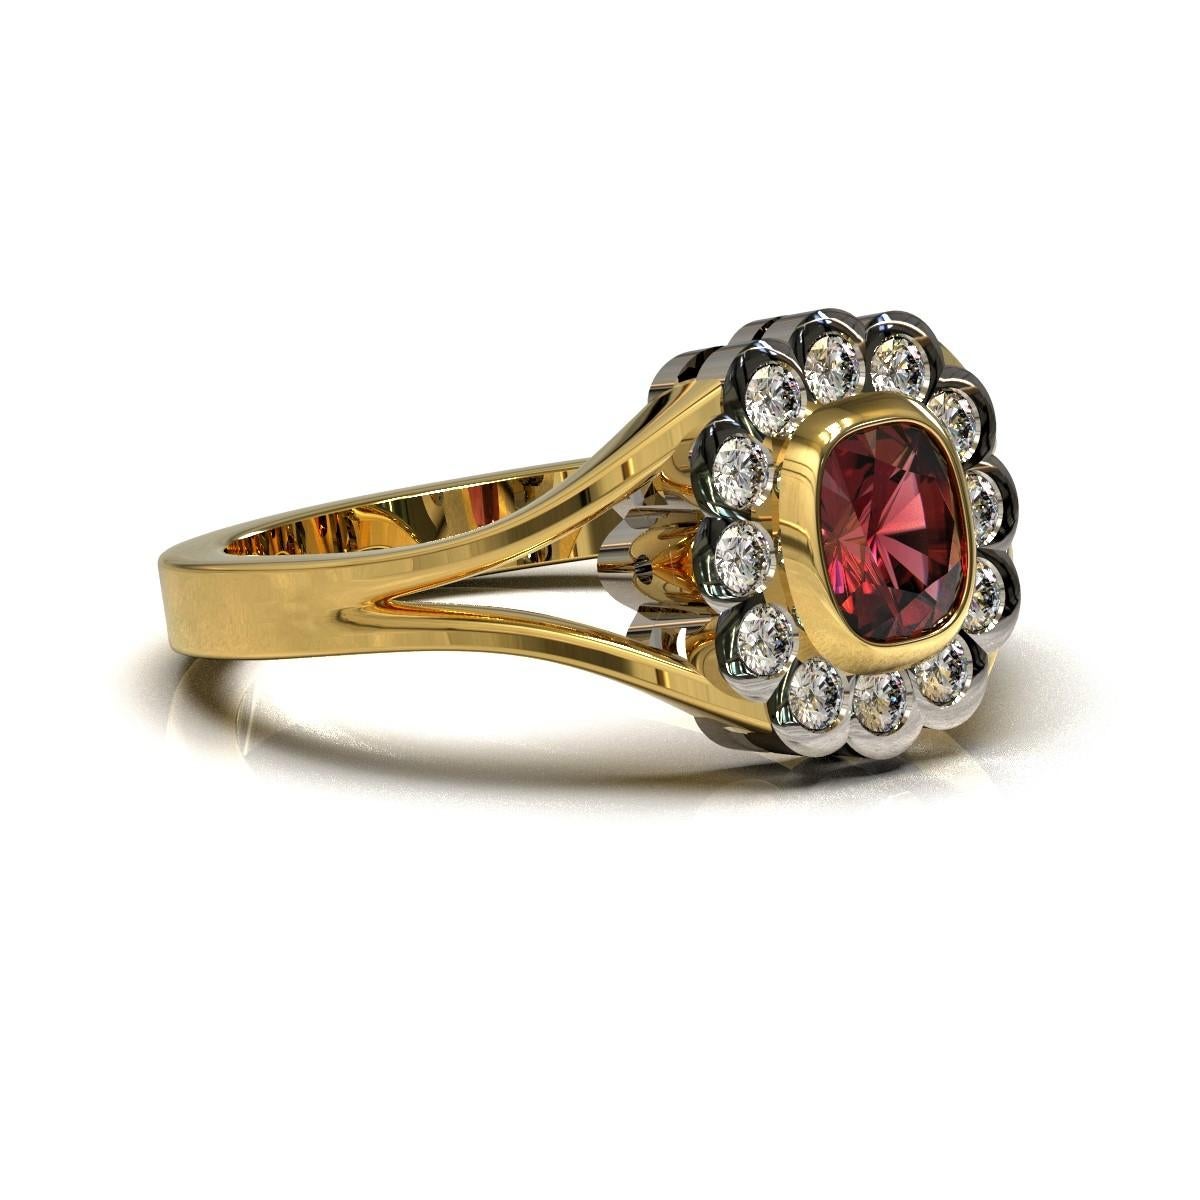 Rubino  Ring

This stunning platinum and 18 carat yellow gold ring is set with an extraordinary cushion cut  ruby complemented with a cluster of diamonds. A distinctive heirloom piece.

Cushion faceted ruby:  bright red,  5.34 x 4.49 x 2.83mm, 0.53